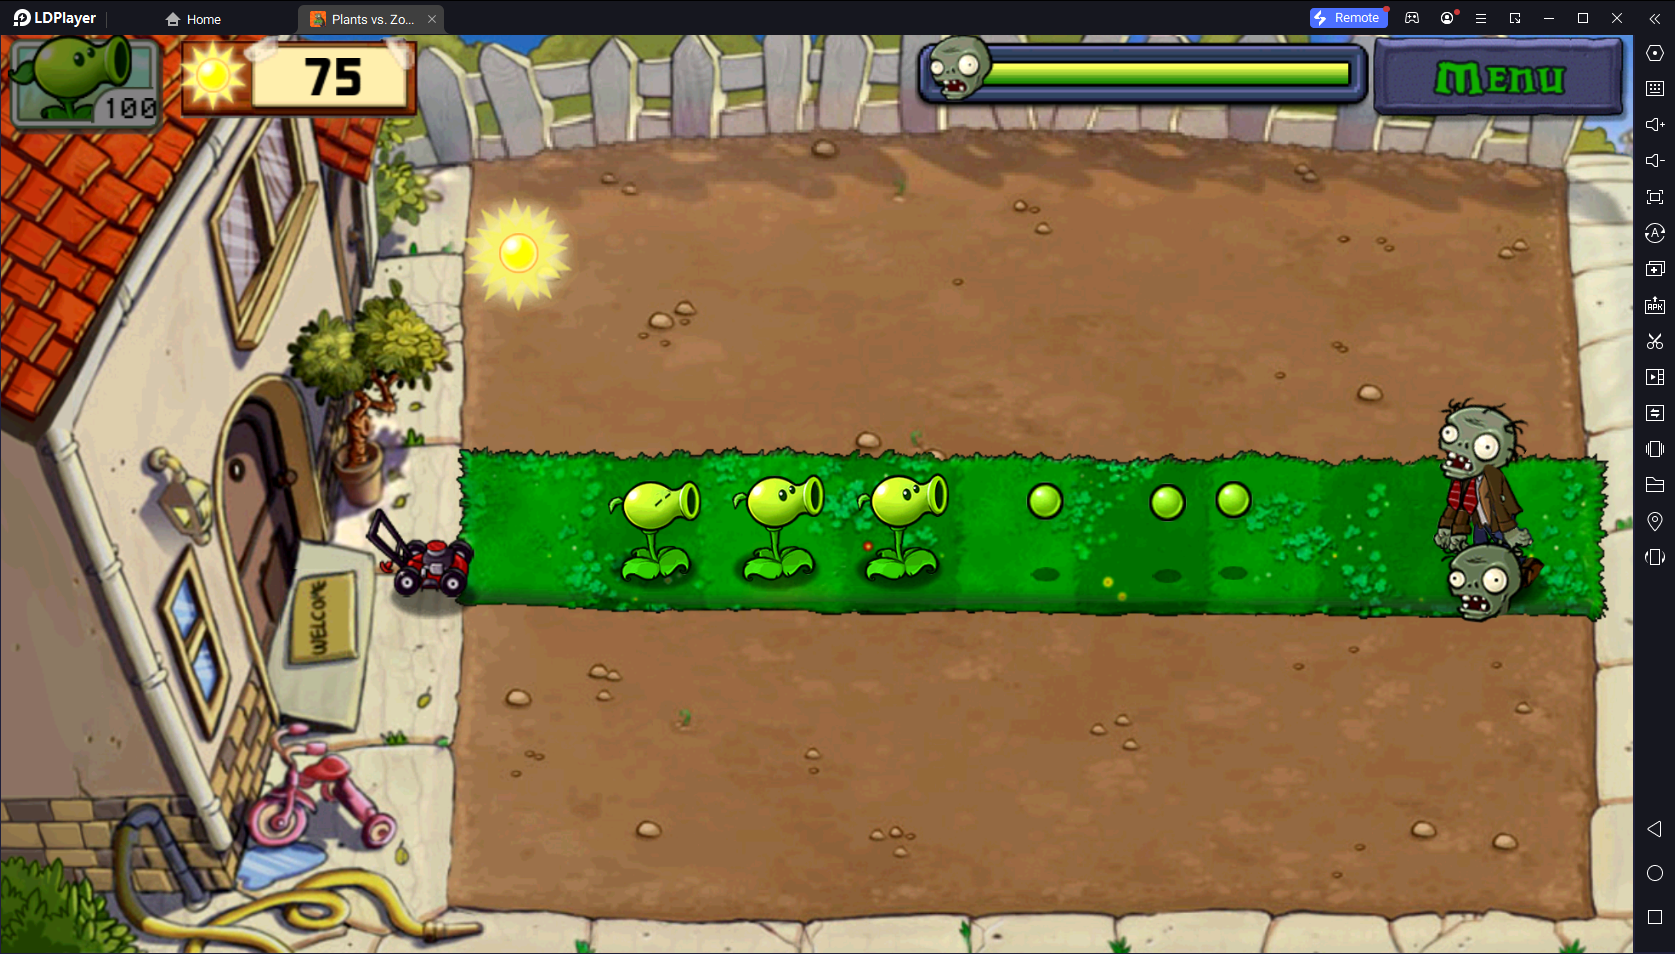 Plants vs Zombies running in LDPlayer on a PC